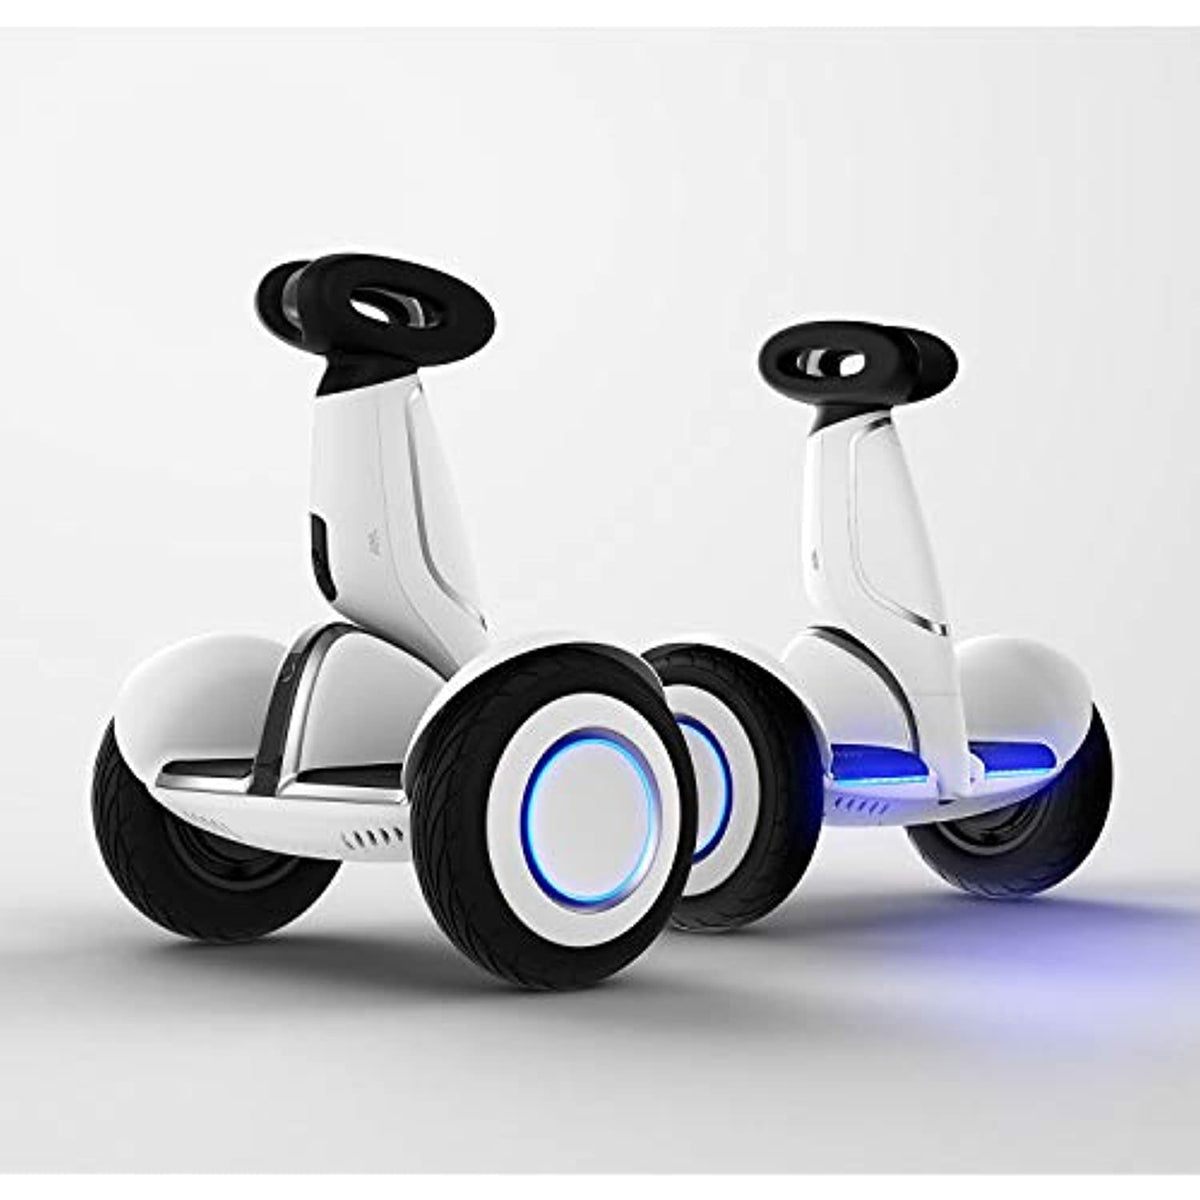 Segway Ninebot S-Plus Smart Self-Balancing Electric Scooter with Intelligent Lighting and Battery System, Remote Control and Auto-Following Mode, White - Like New